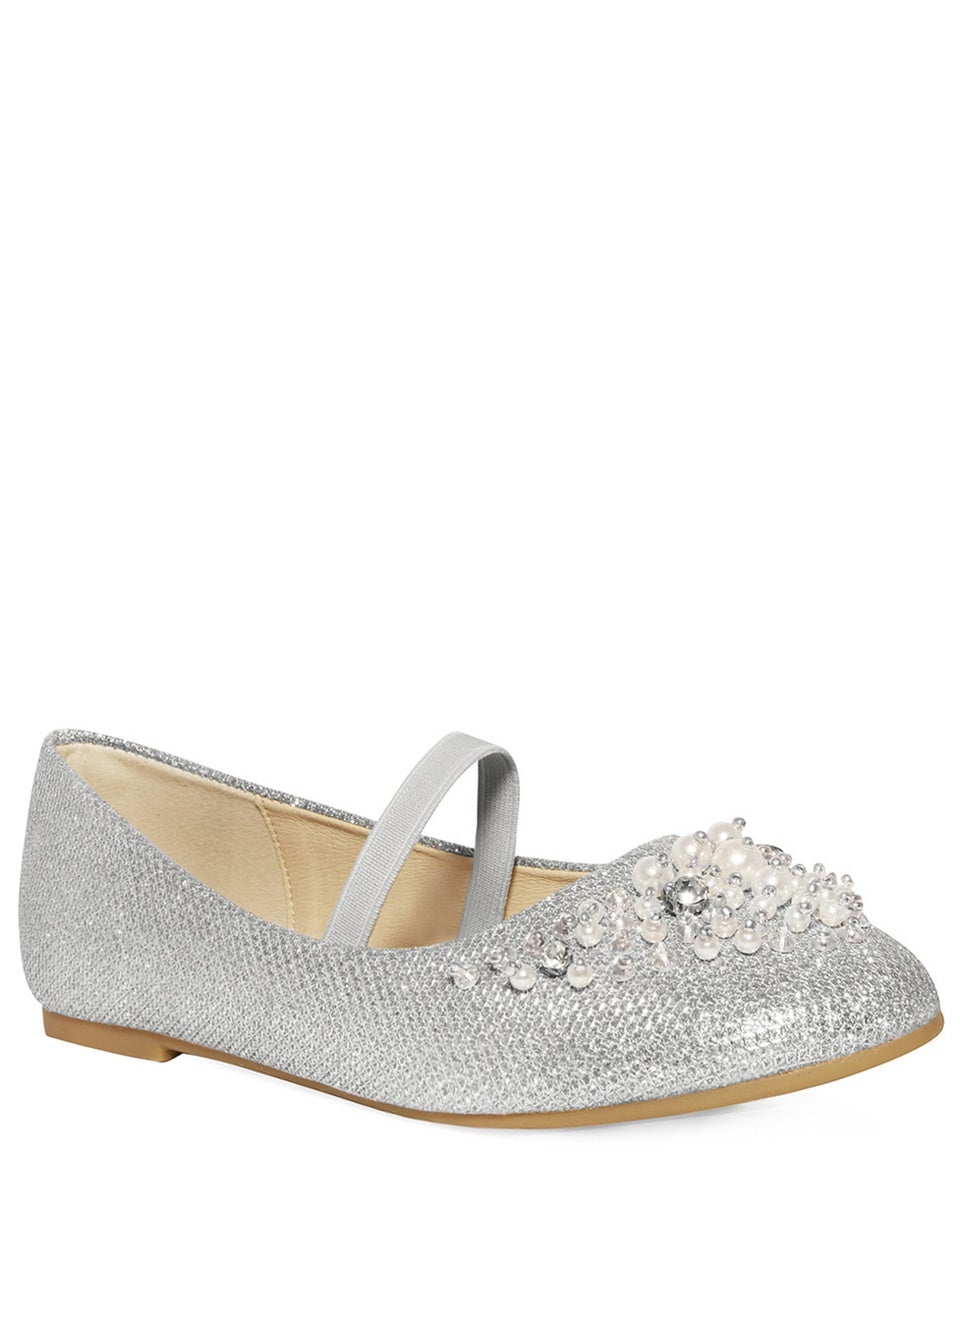 Where's That From Silver Libbie Kids Diamante Embellished Platform ...